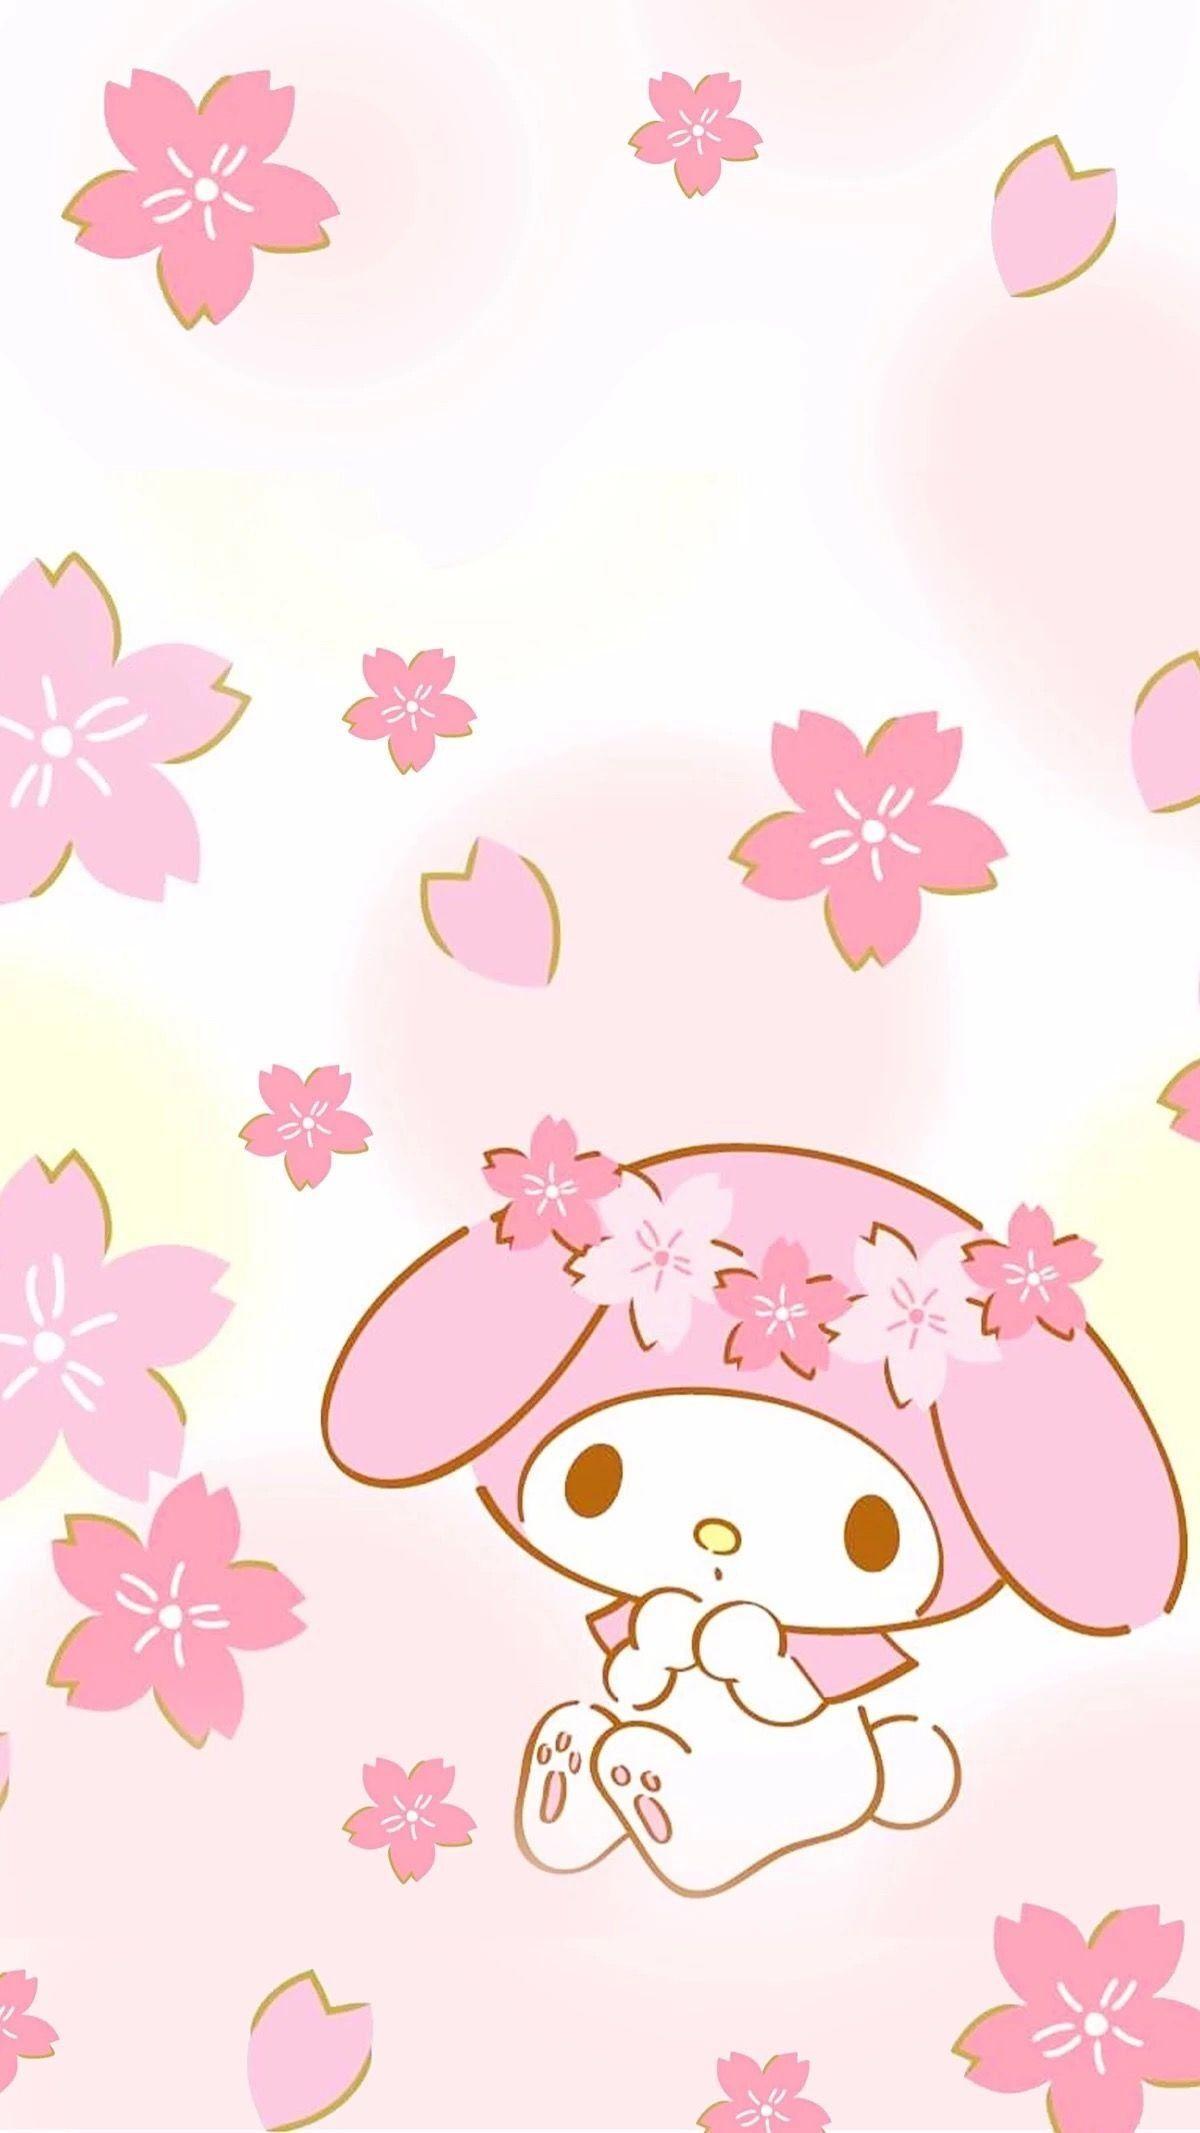 Cute Kawaii Pink Melody Wallpaper for Android  Download  Cafe Bazaar